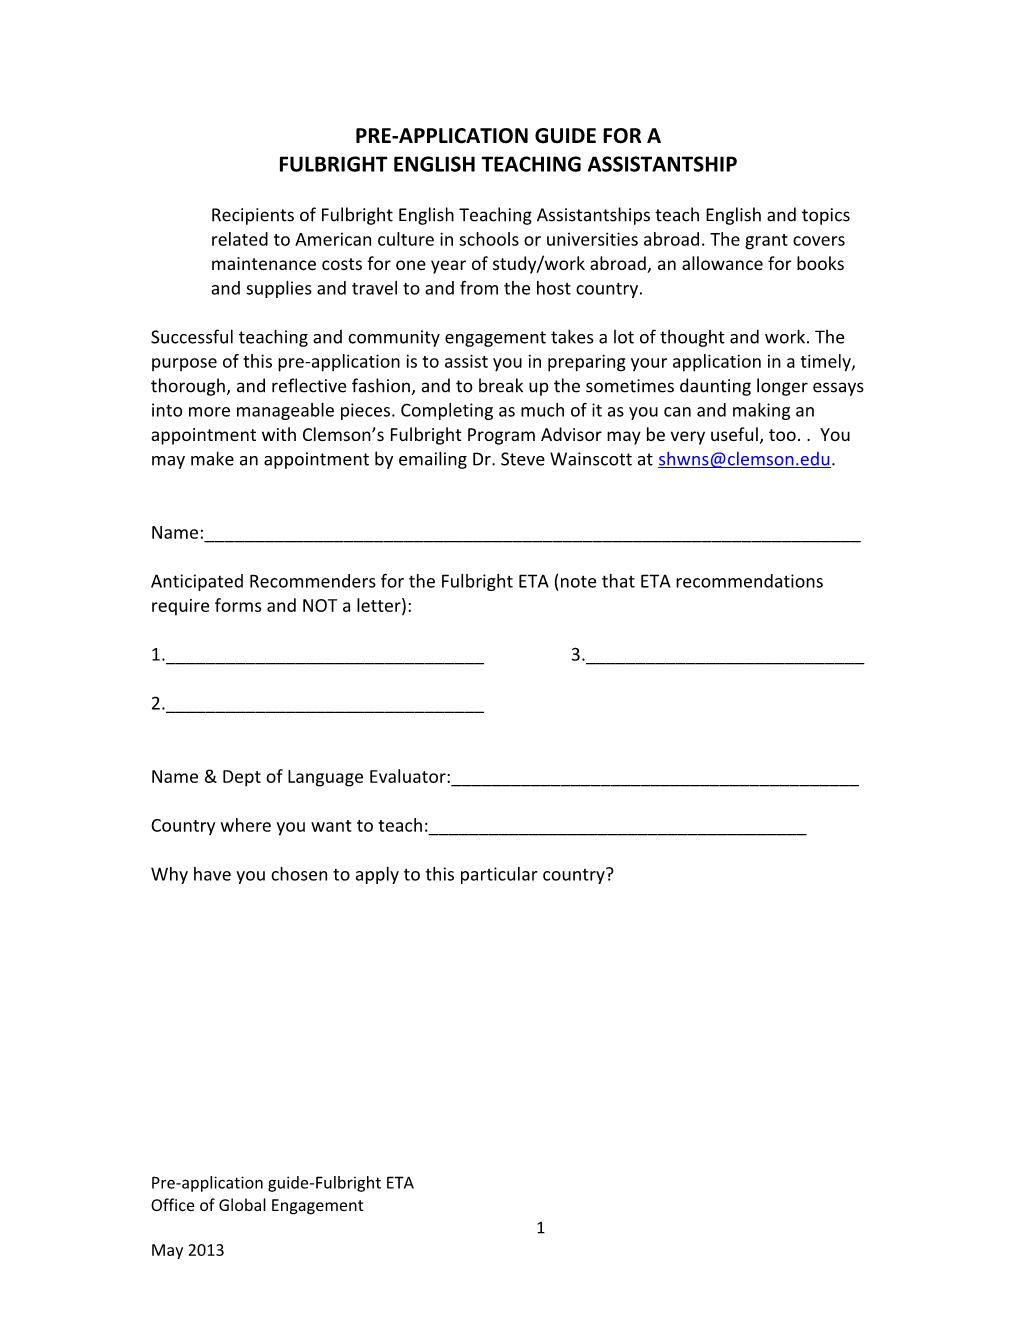 Pre-Application for Fulbright Teaching Assistantship Grant